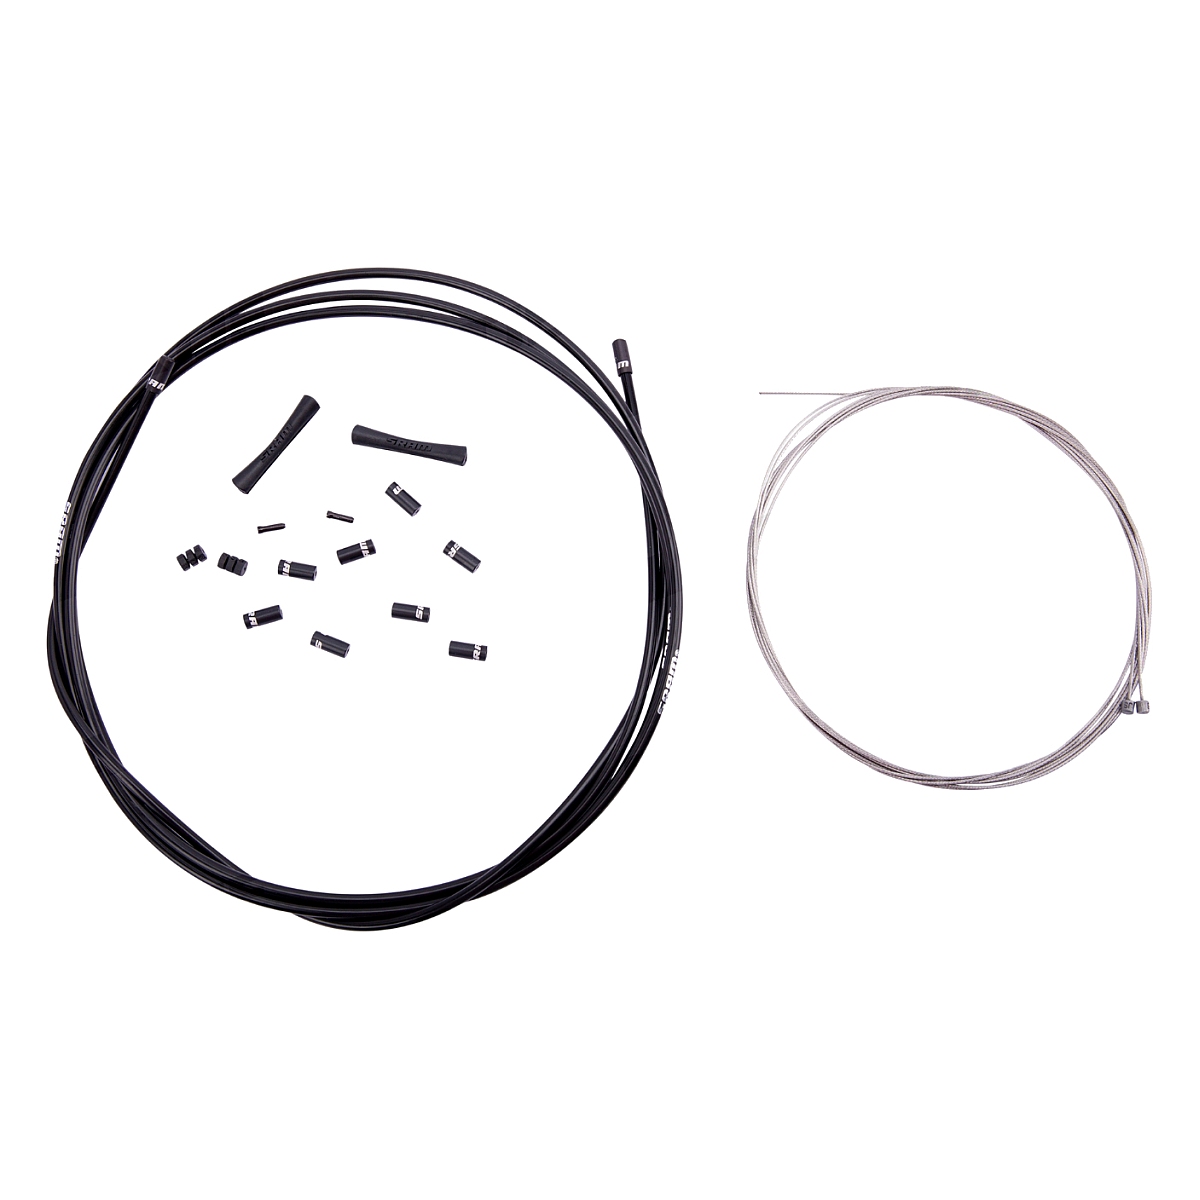 Image of SRAM Road & MTB Stainless Shift Cable Kit - 4mm - black